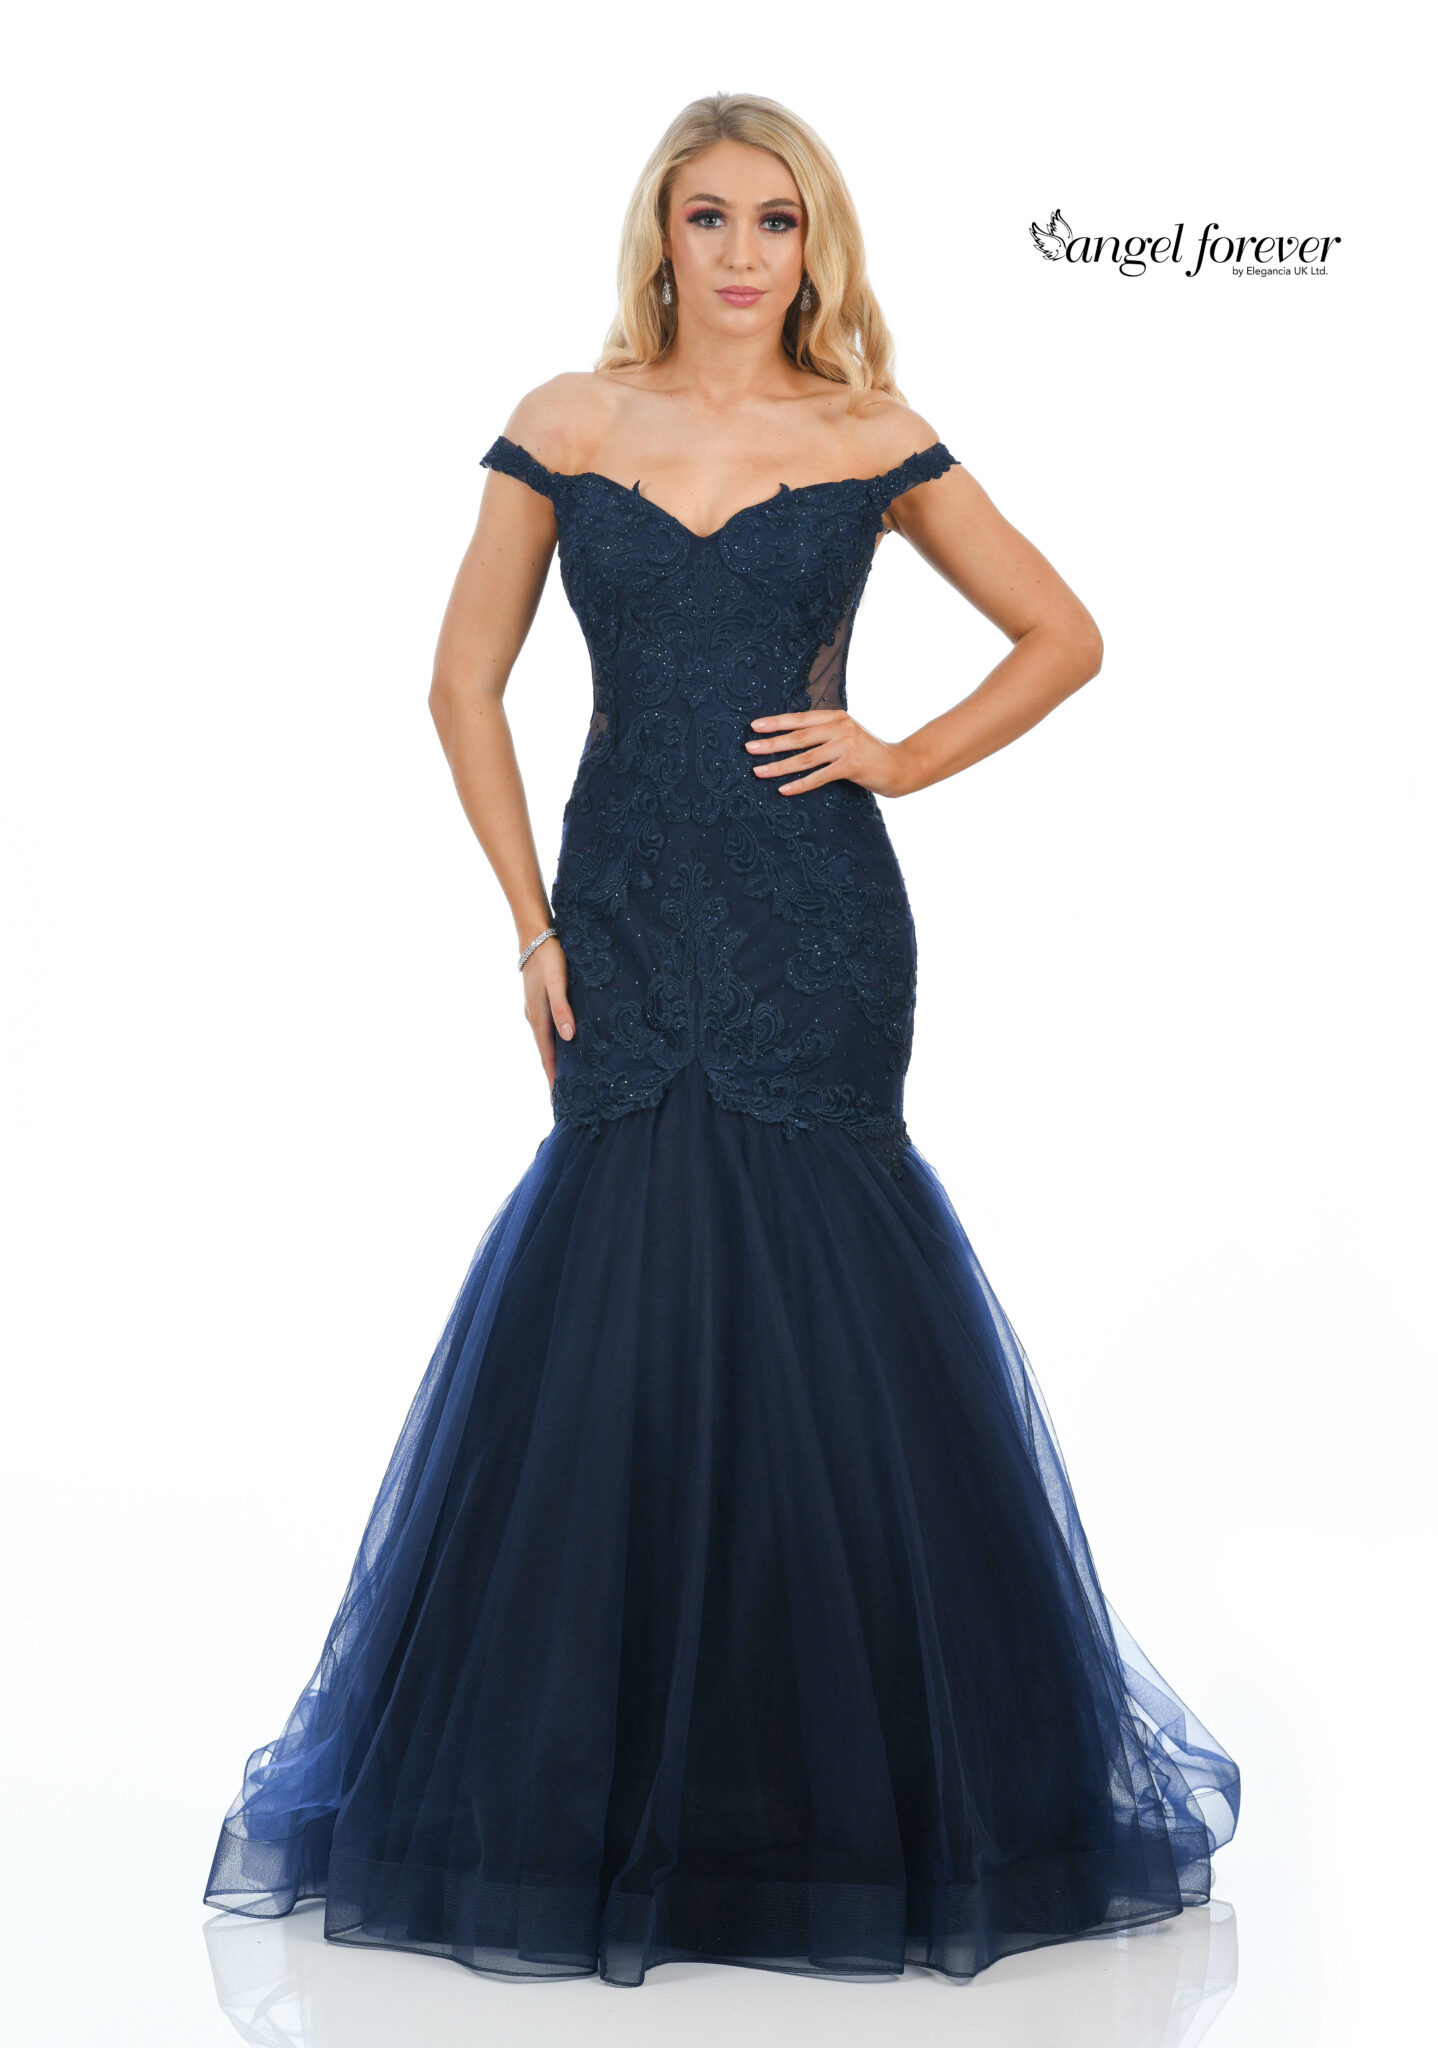 Angel Forever Prom Dresses - Page 3 of 11 - Dress To Go - Prom Dresses ...